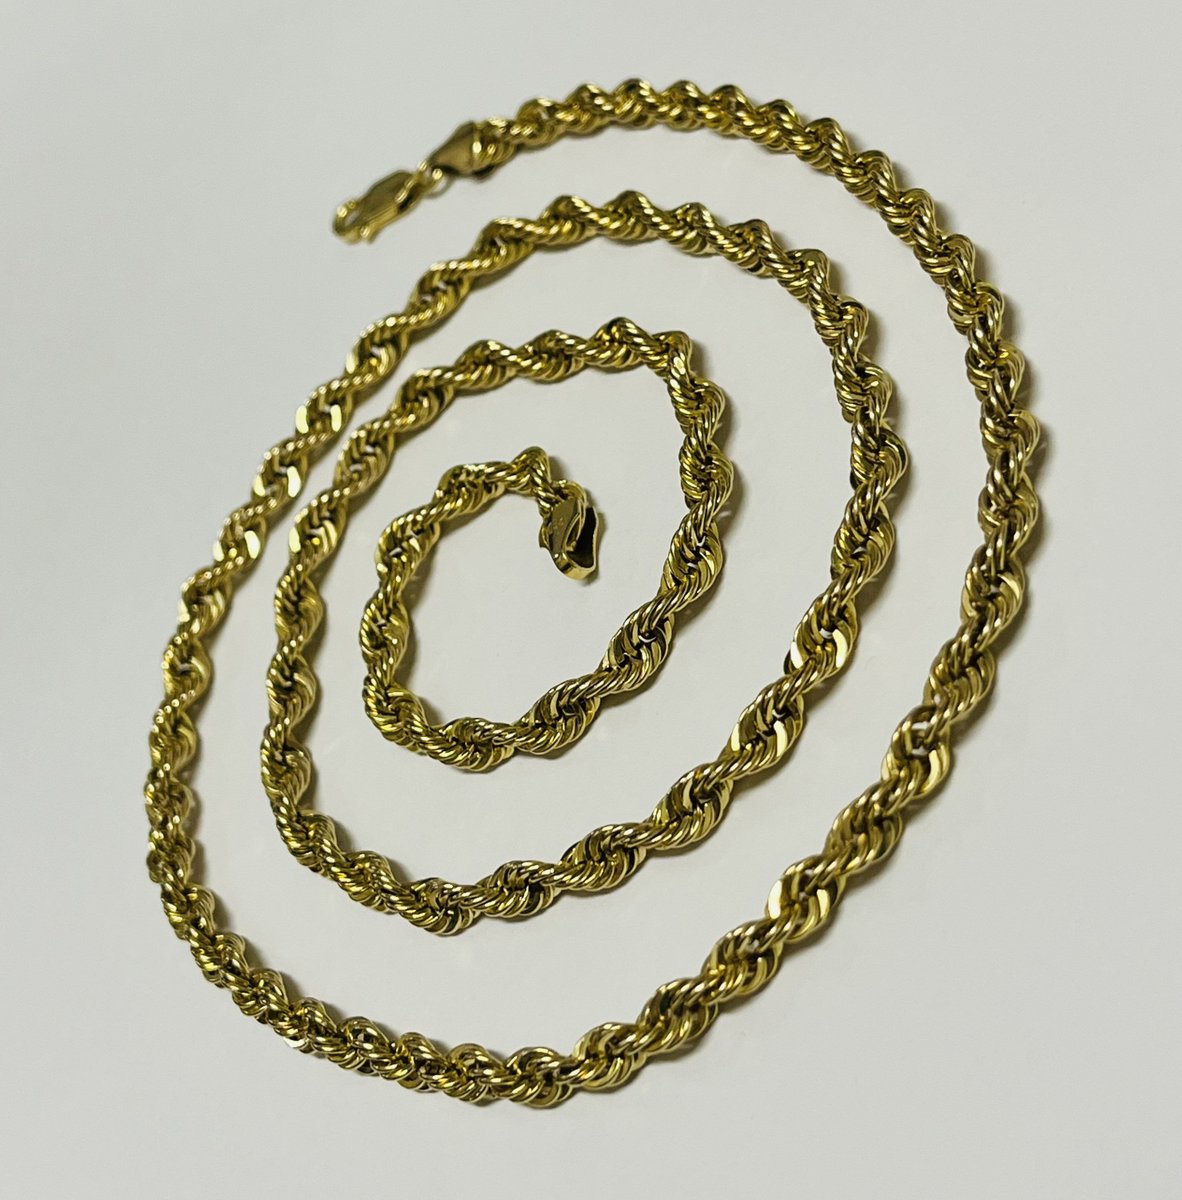 Excited to share the latest addition to my #etsy shop: Vintage 10K Yellow Gold Rope Link Chain etsy.me/3osYxYr #gold #rope #lobsterclaw #10kyellowgold #pgda #pagoda #designer #ropechain #chain